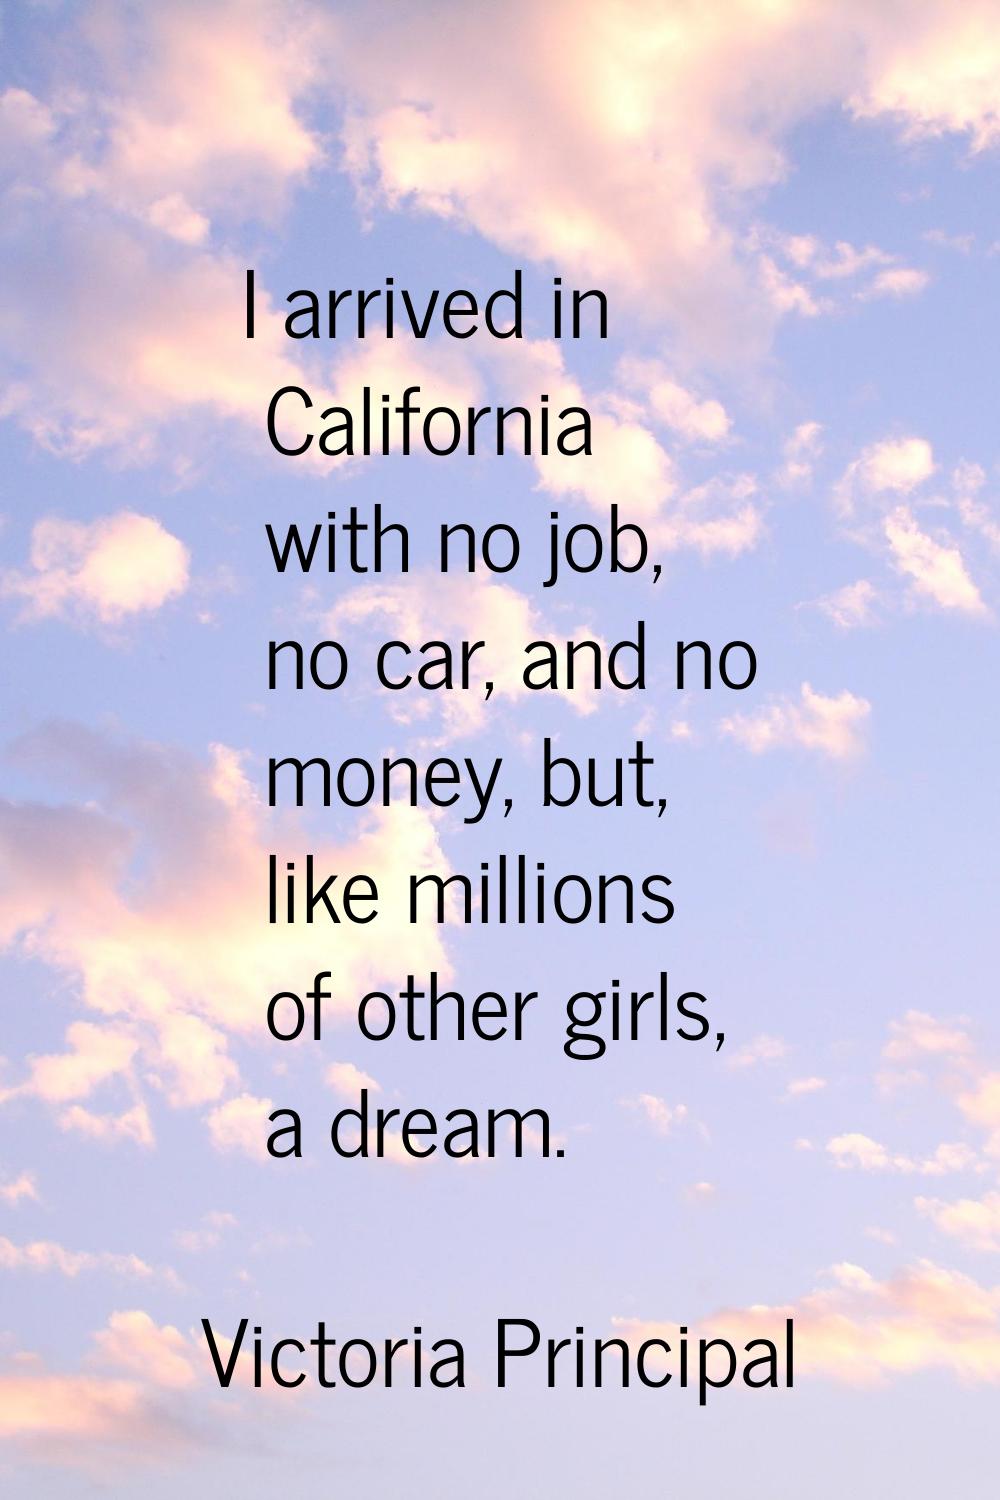 I arrived in California with no job, no car, and no money, but, like millions of other girls, a dre